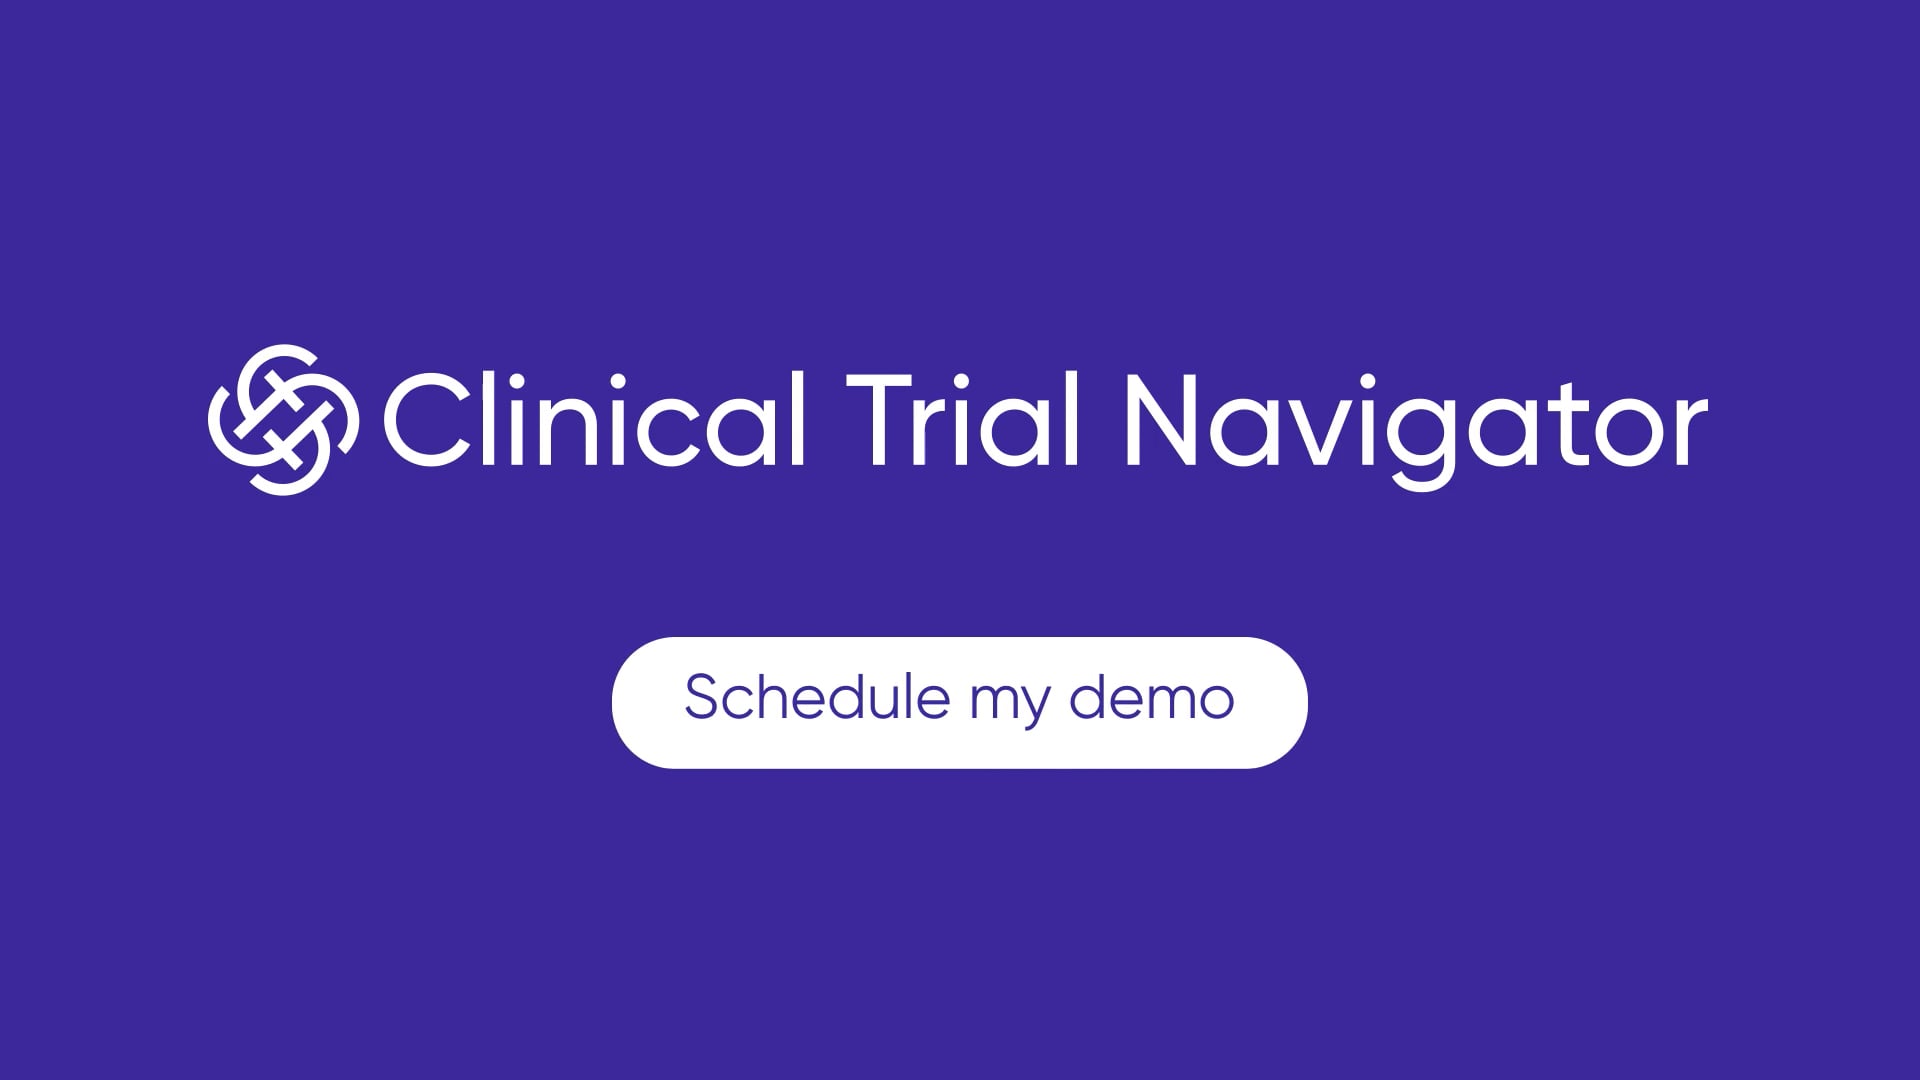 Clinical Trial Navigator 30-Second